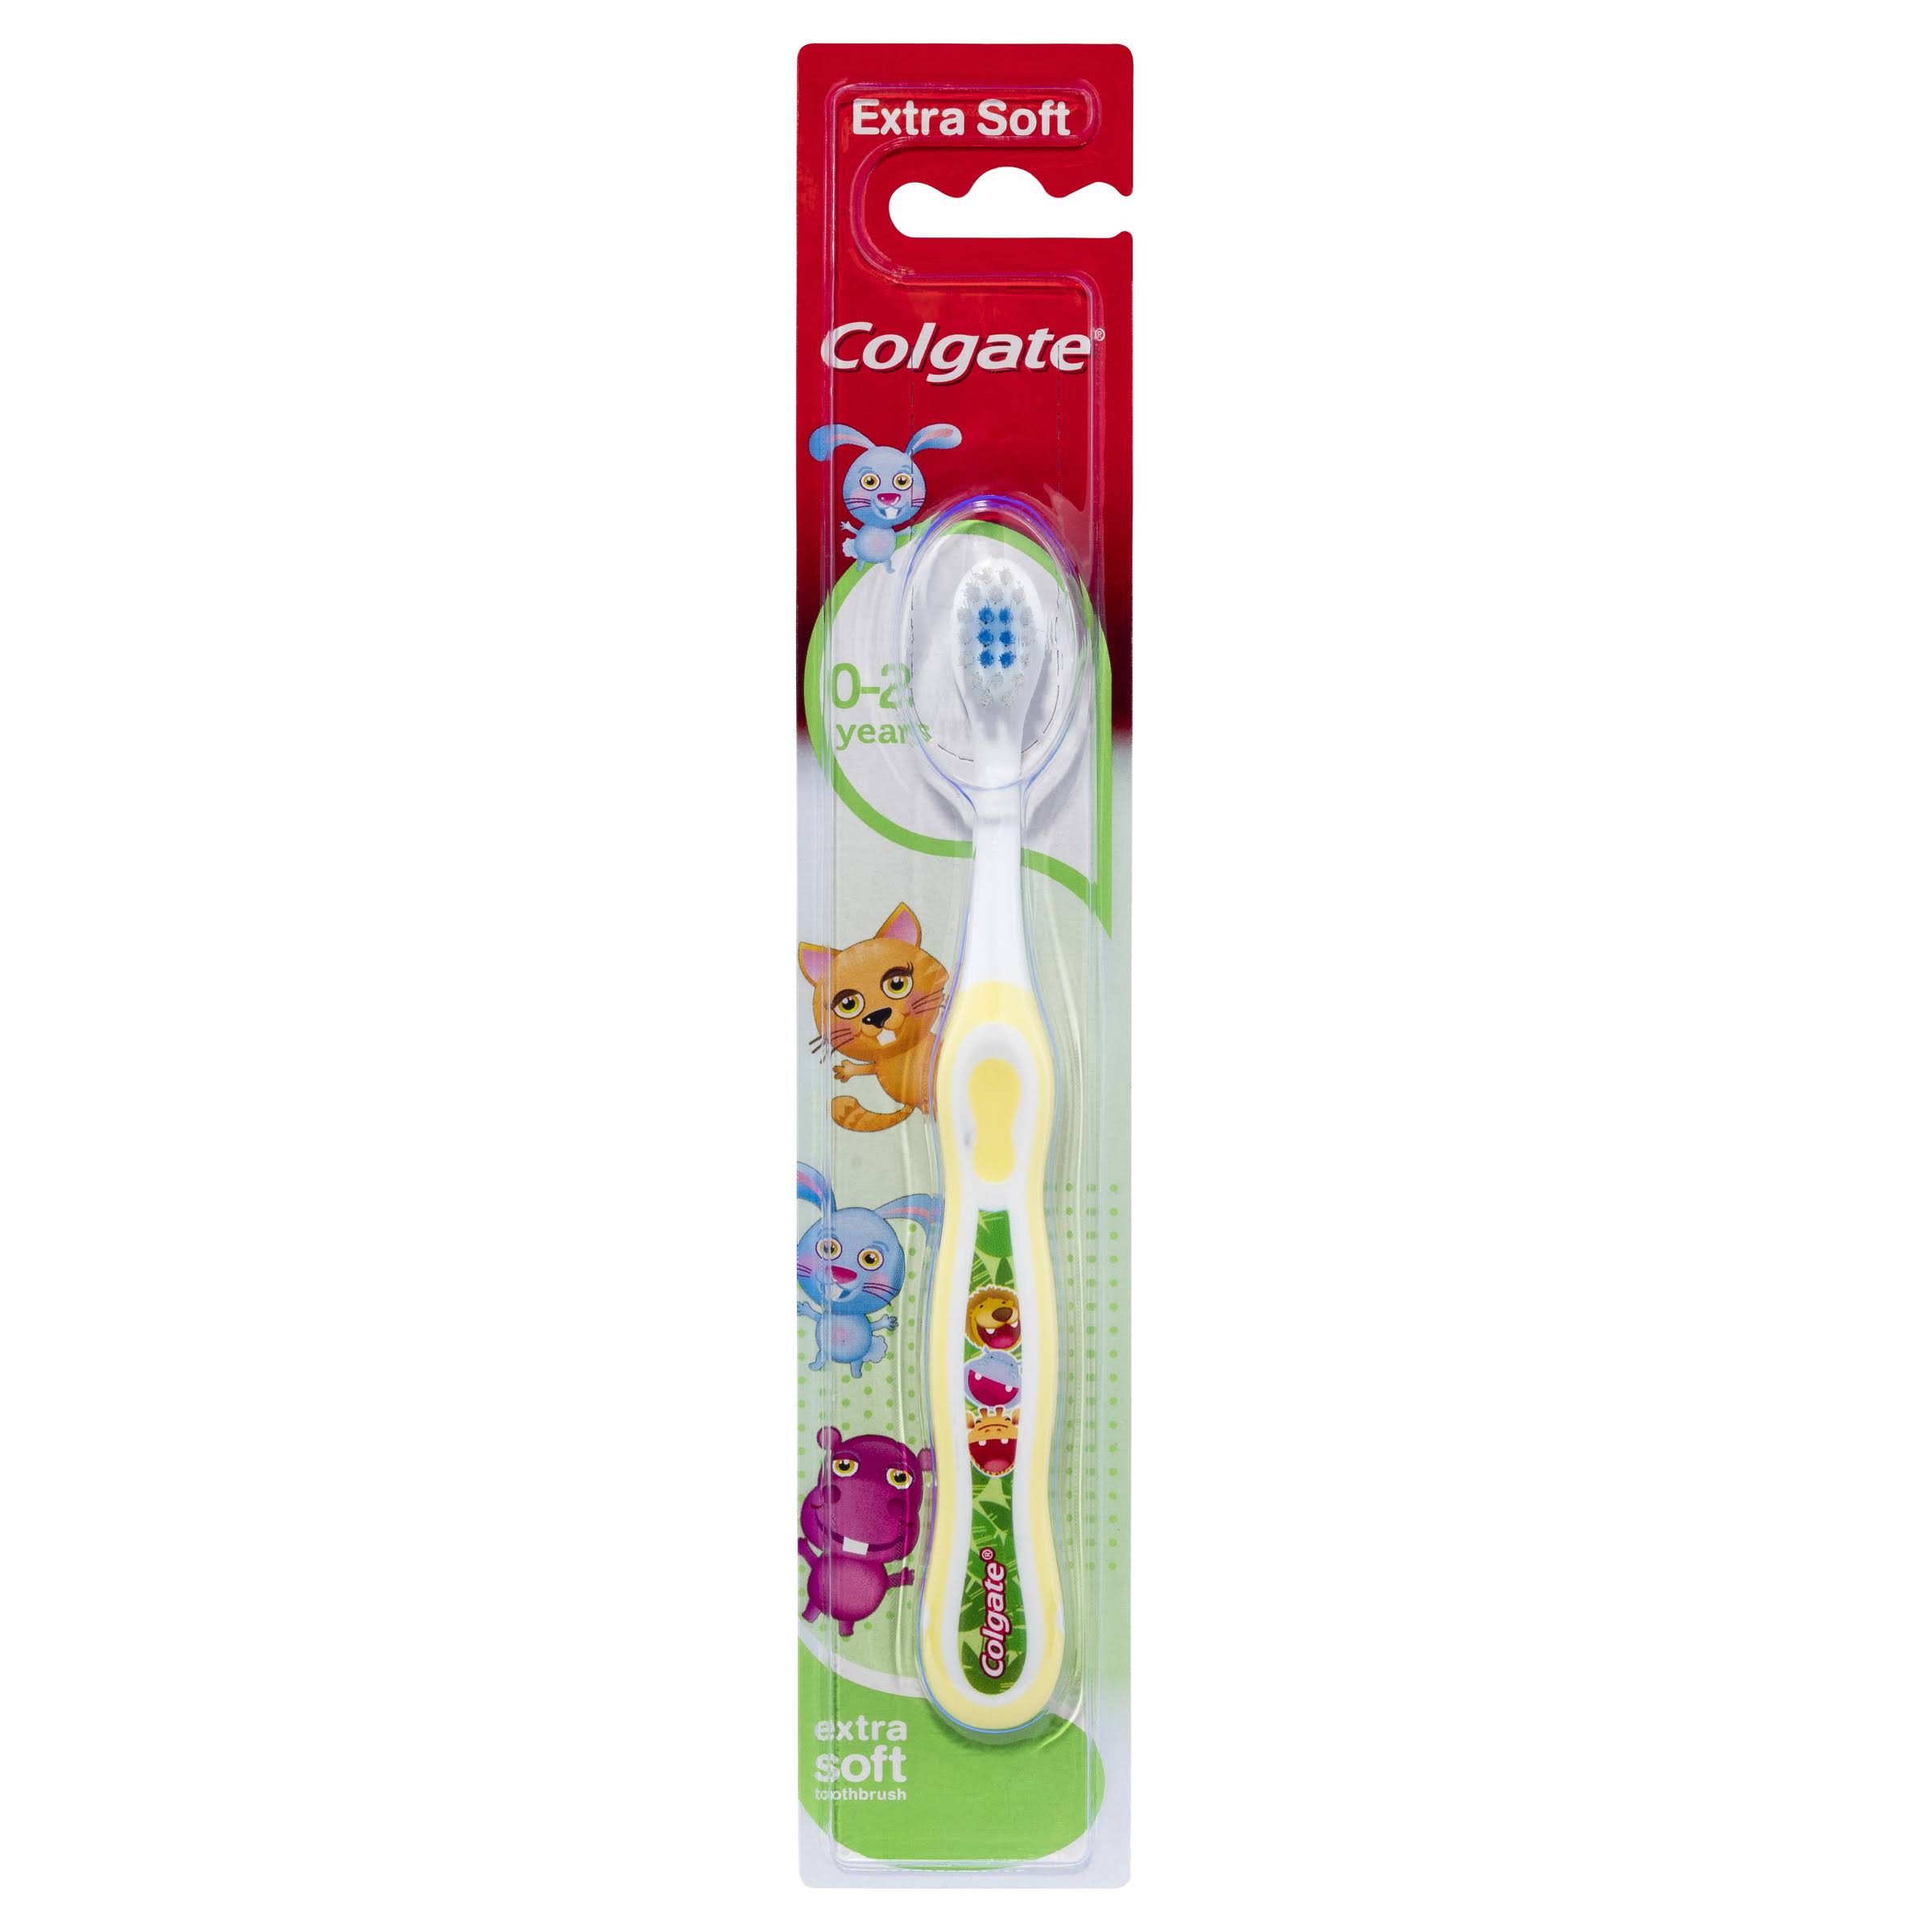 Colgate Kids Smiles My First Toothbrush - 0 to 3 Years, Extra Soft